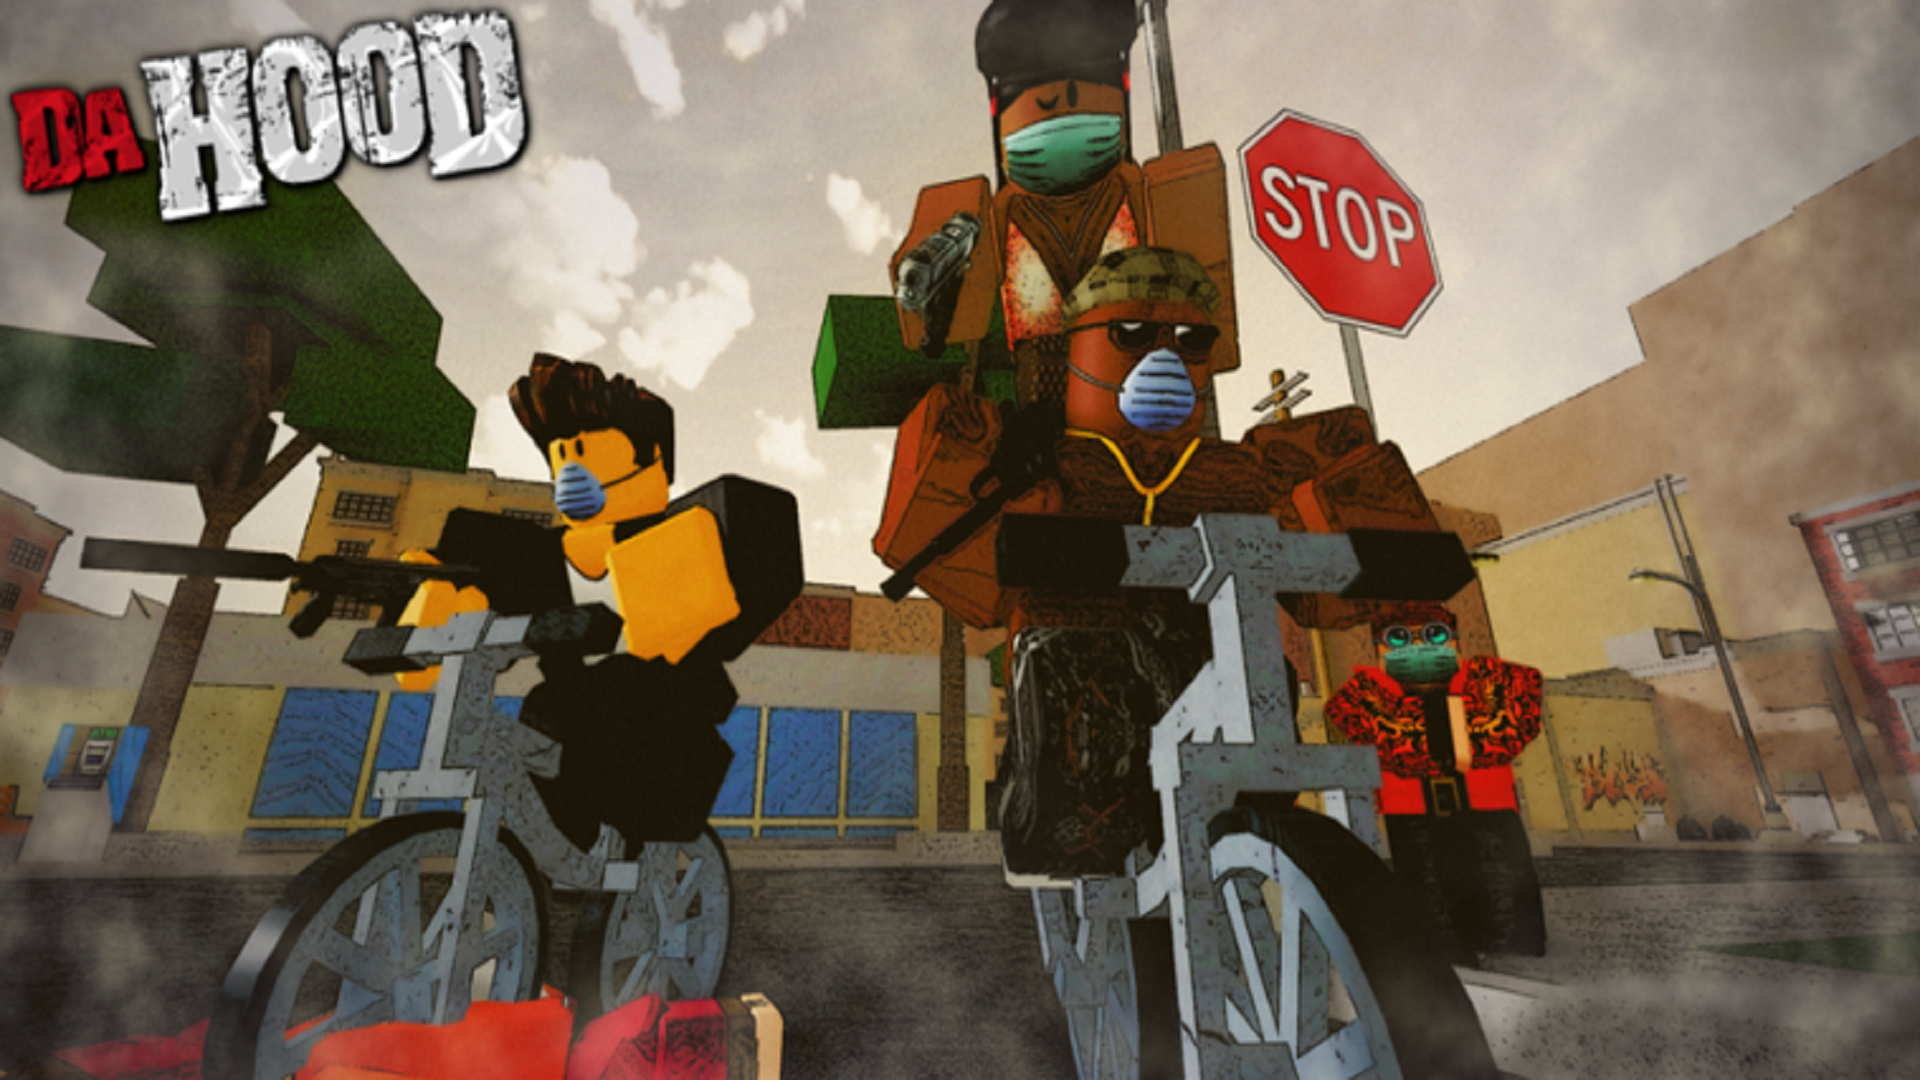 Three surgical-masked Roblox characters ride bikes through an urban street in the banner for Roblox experience Da Hood.